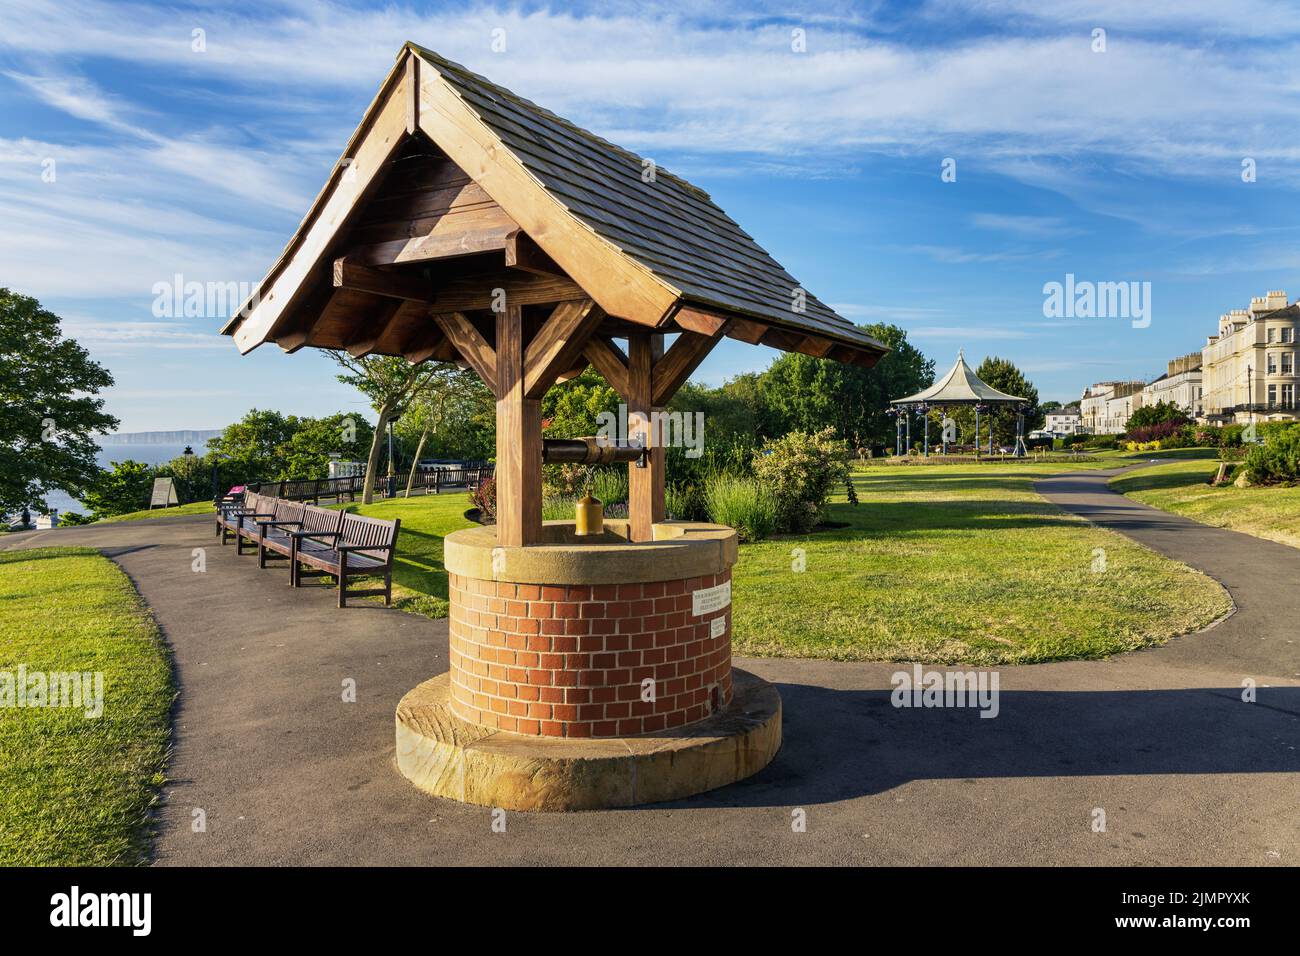 The Wishing Well in Crescent Gardens at Filey in North Yorkshire. Taken on a beautiful sunny morning. Stock Photo